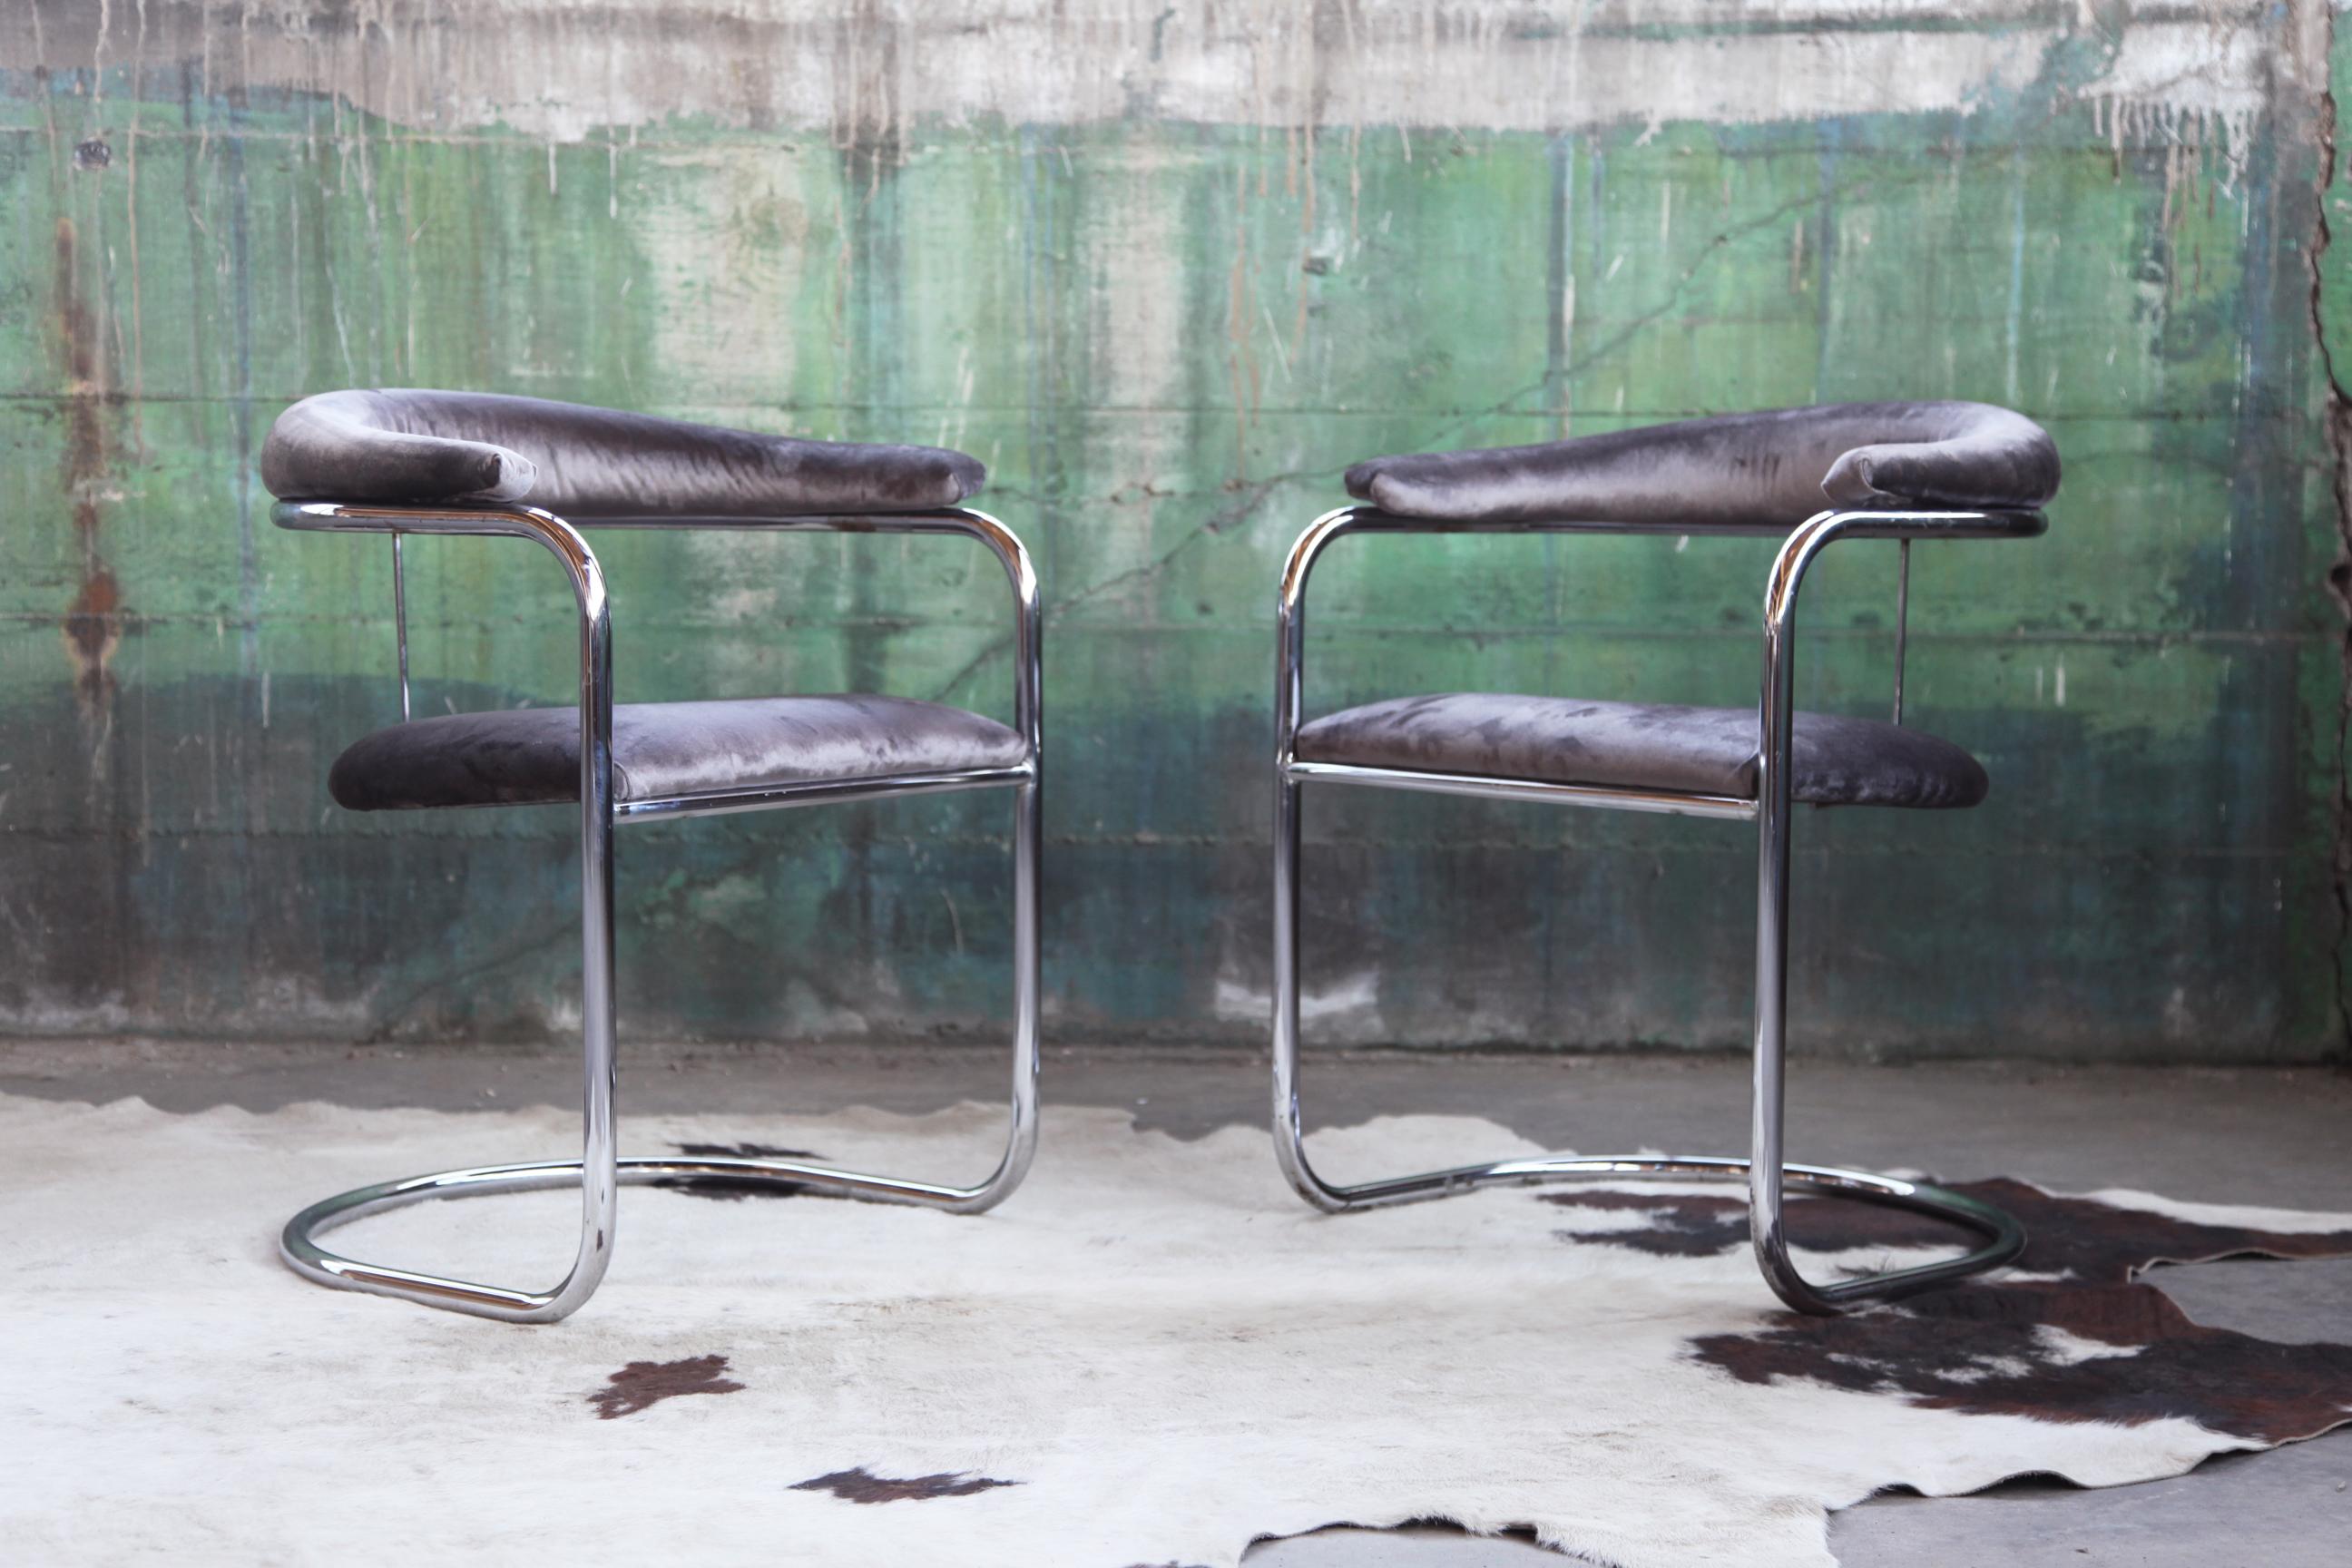 Mid-Century Modern vintage original ss33 arm chairs by Iconic Italian Designer Anton Lorenz for Thonet circa 1930-1940s and 1960-1970s. This Classic chair is a beauty. This pair are nicely reupholstered in a grey velour textile, circa the 1970s. We